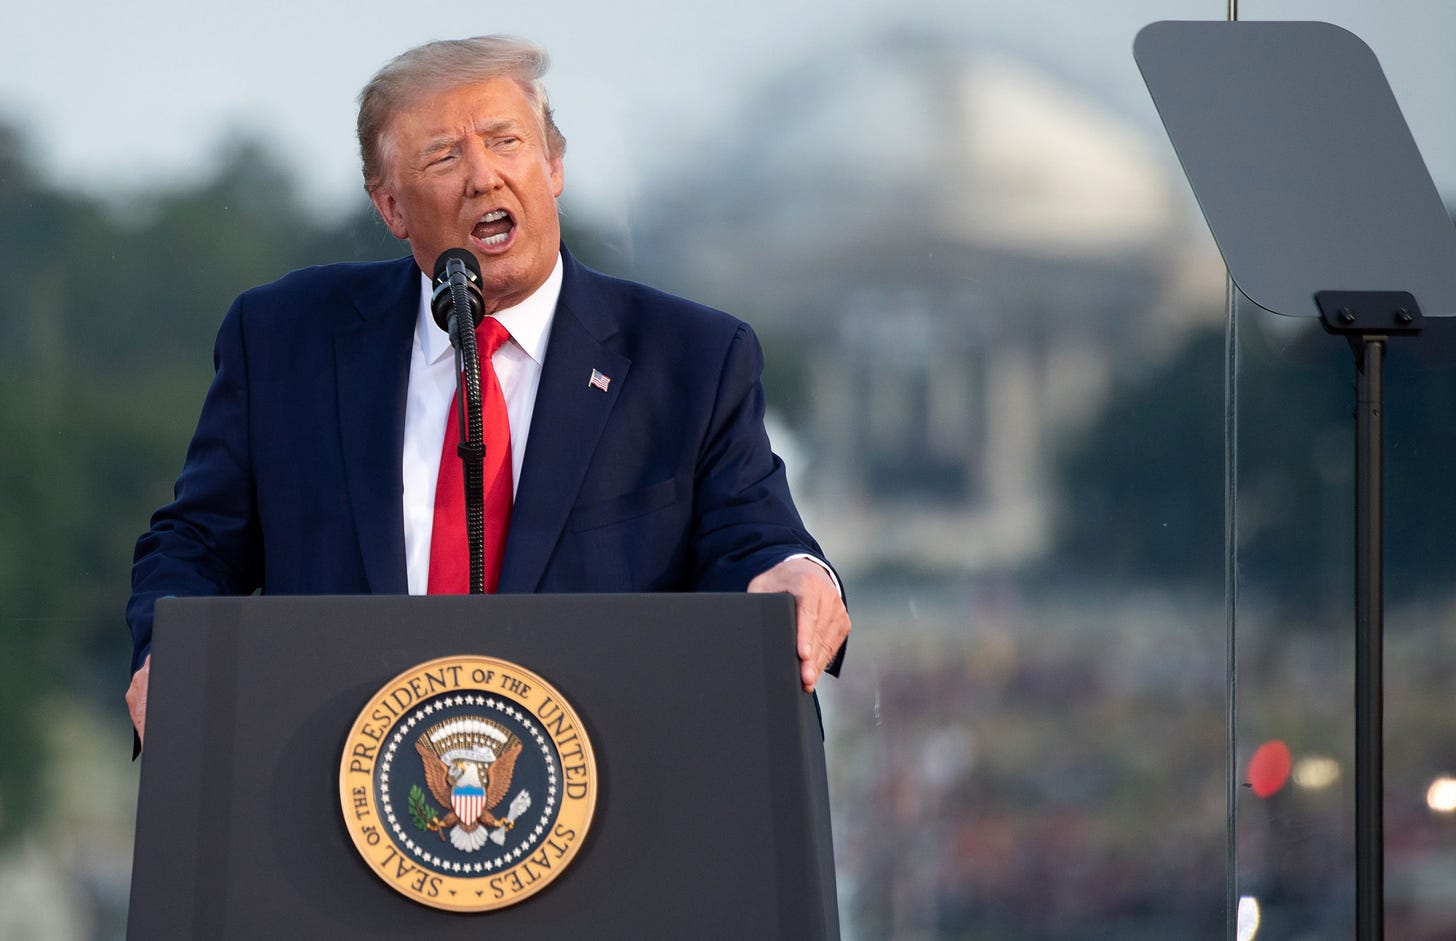 Trump Appears to Threaten CNN Over Network's July 4th Speech Coverage